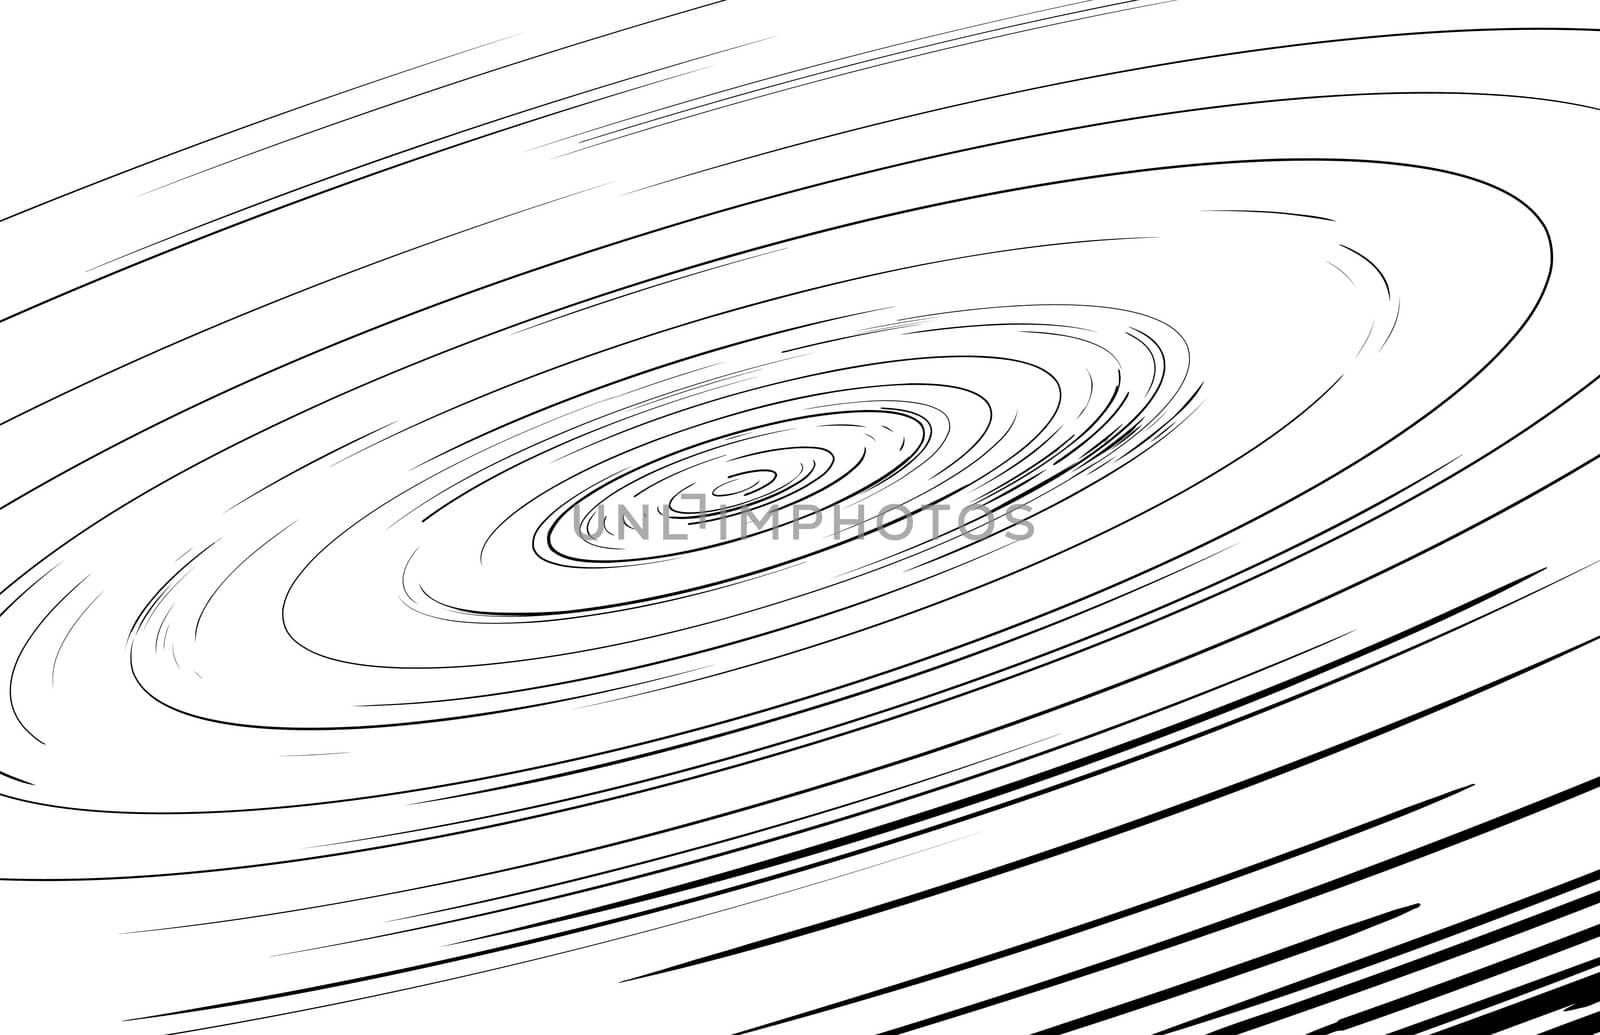 Fast moving spinning whirlpool background illustration in black outline